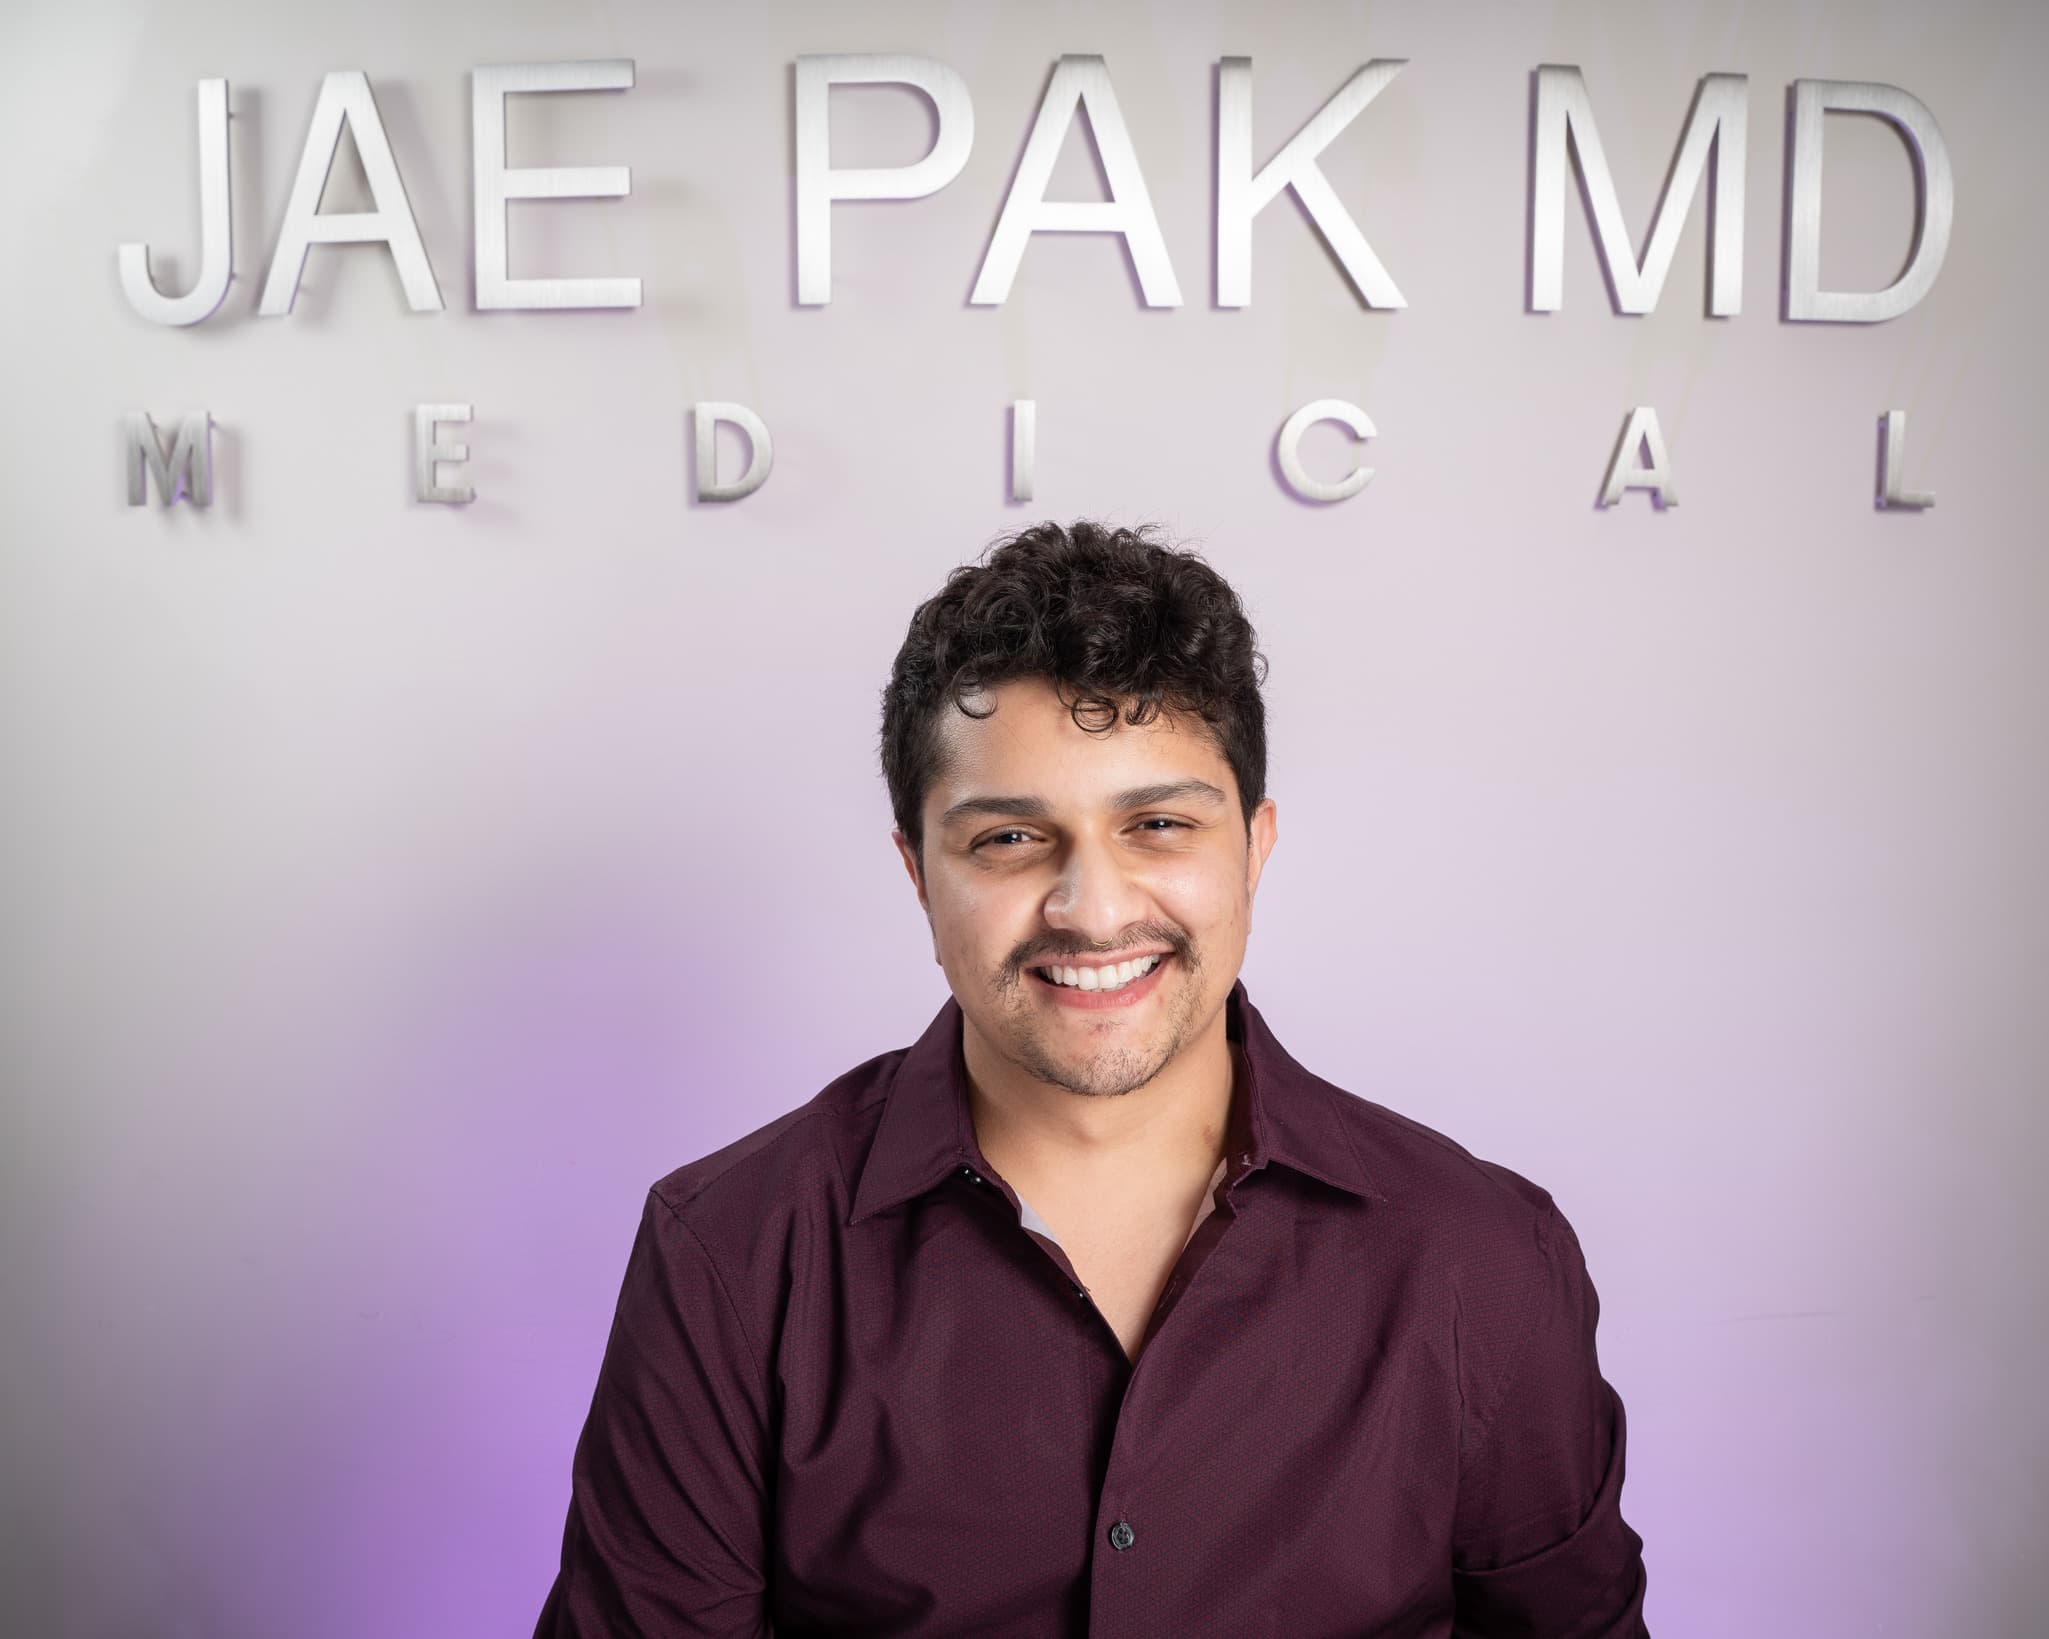 An image of a man with a big a smile had his picture taken at Dr. Jae Pak's medical clinic after his hair transplant